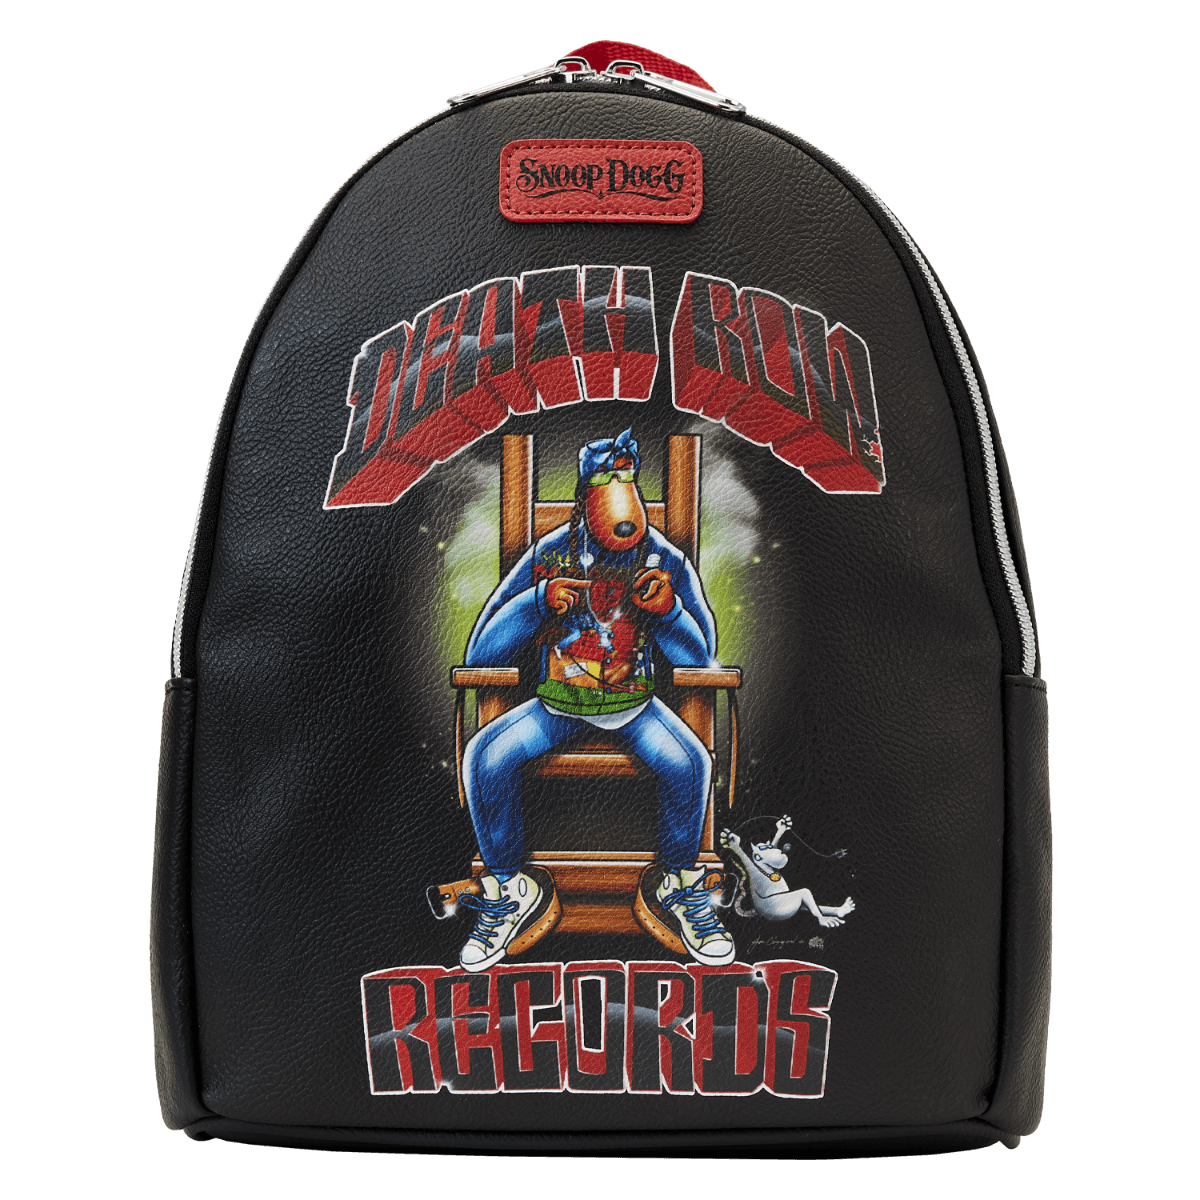 FUNSNPBK0001 Snoop Dogg - Death Row Records Mini Backpack - Loungefly - Titan Pop Culture